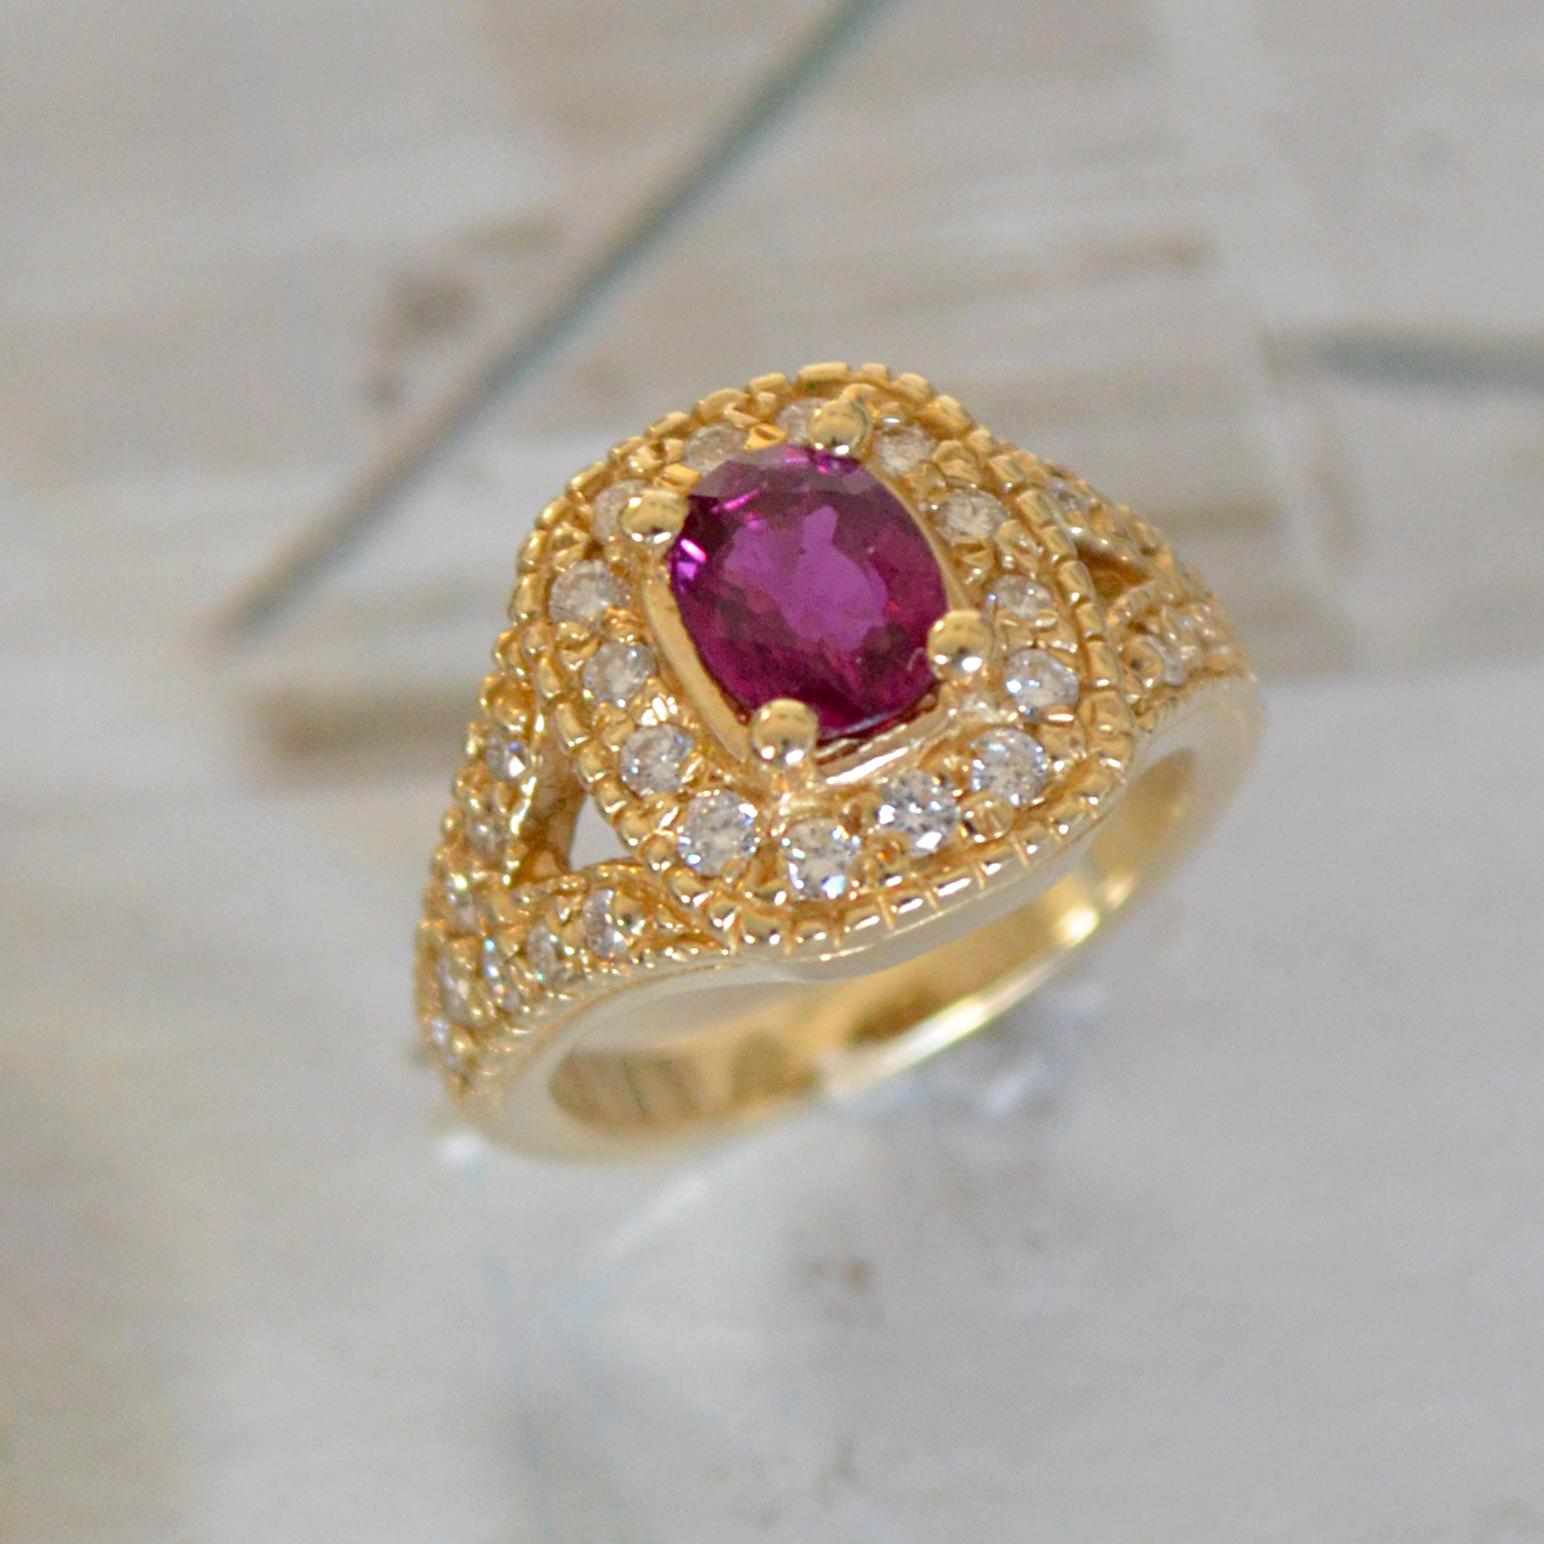 Ruby Ring With Diamonds Set In Yellow Gold

Carat Weight: Apprx 1.00
Measurements: 6.8MM X 5.2MM
Color : Pinkish Red

Ring Details:
Metal: 14k Yellow
Size: 4.5 
Number of Diamonds: 30
